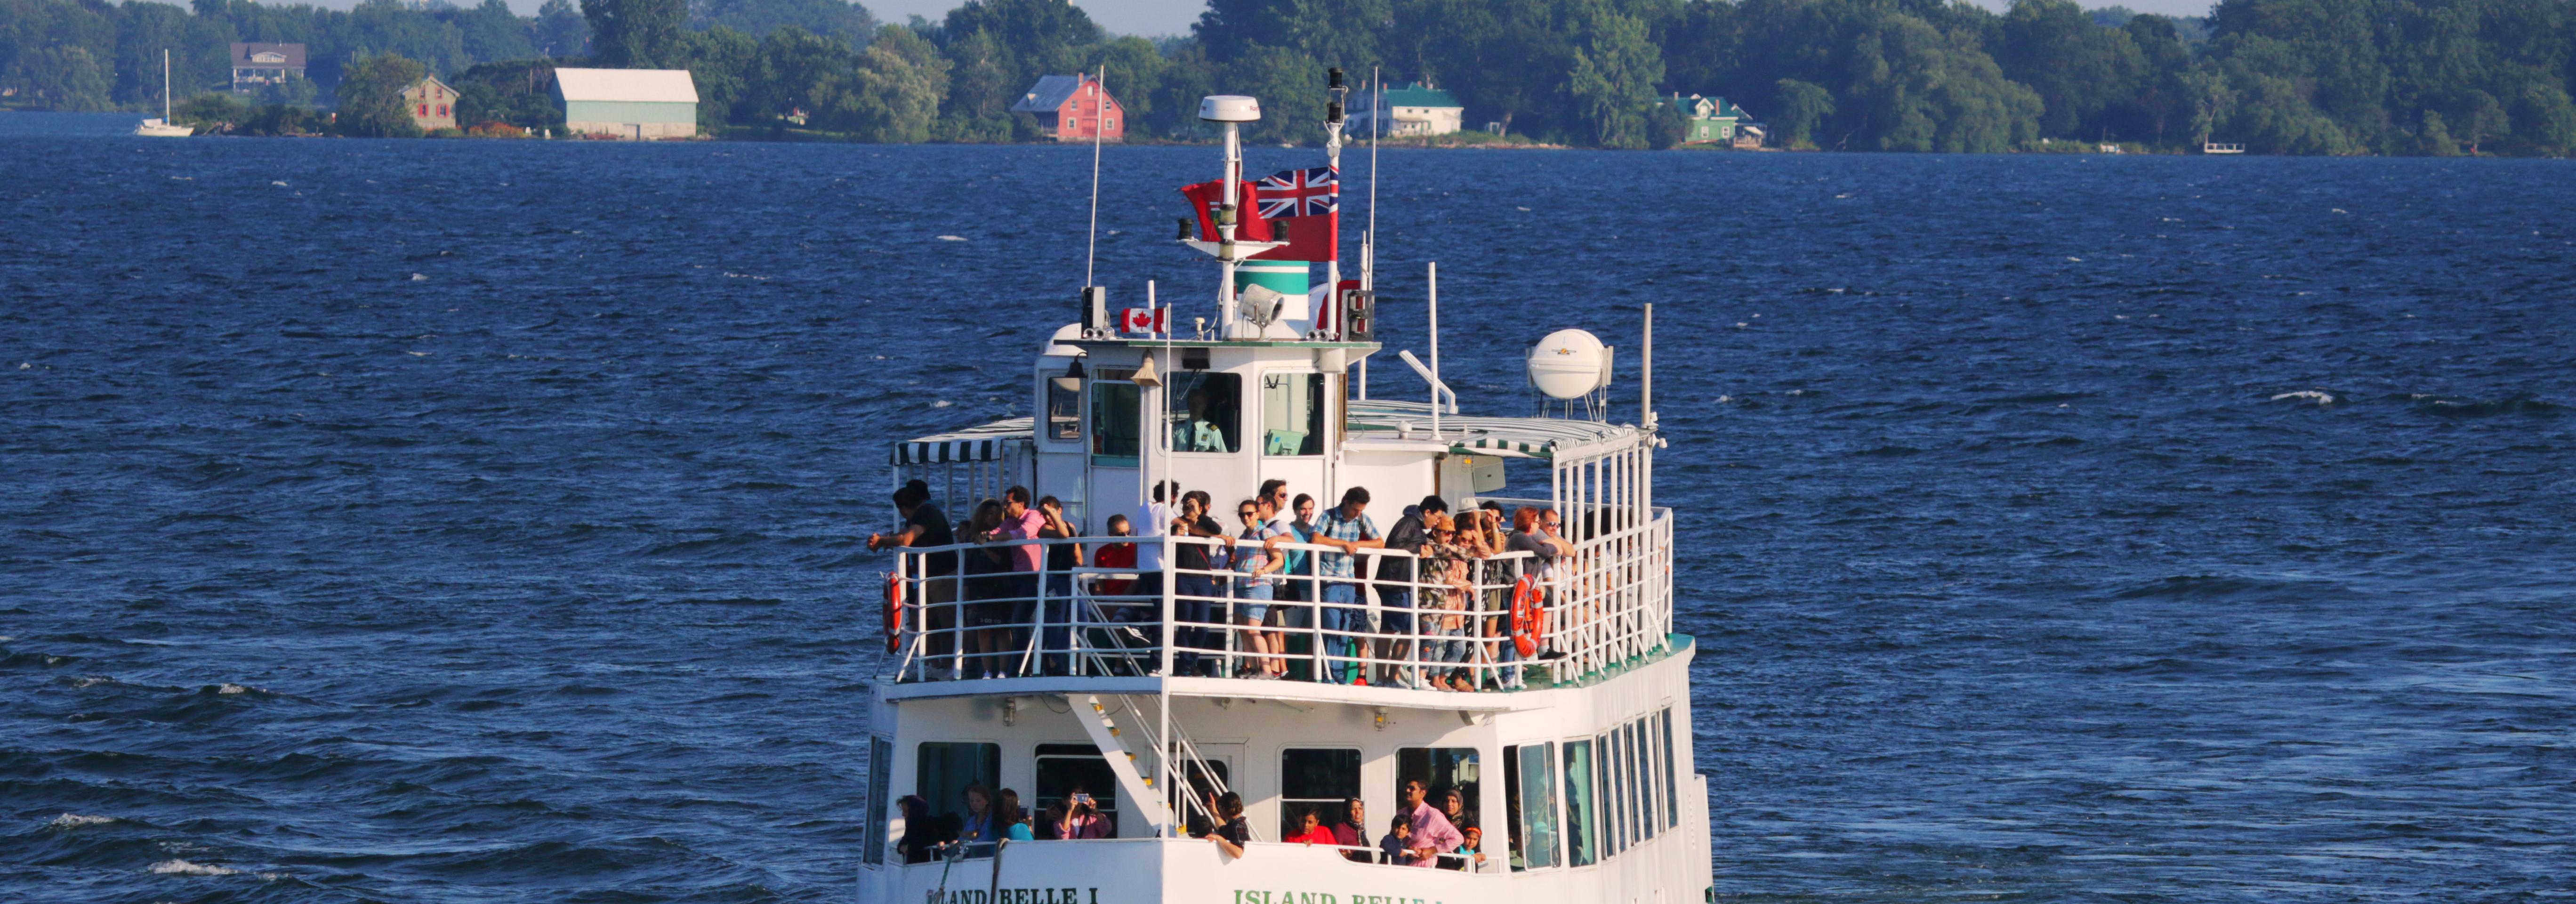 Kingston Discovery Cruise on the waterfront (1 hour) – Departing from Kingston